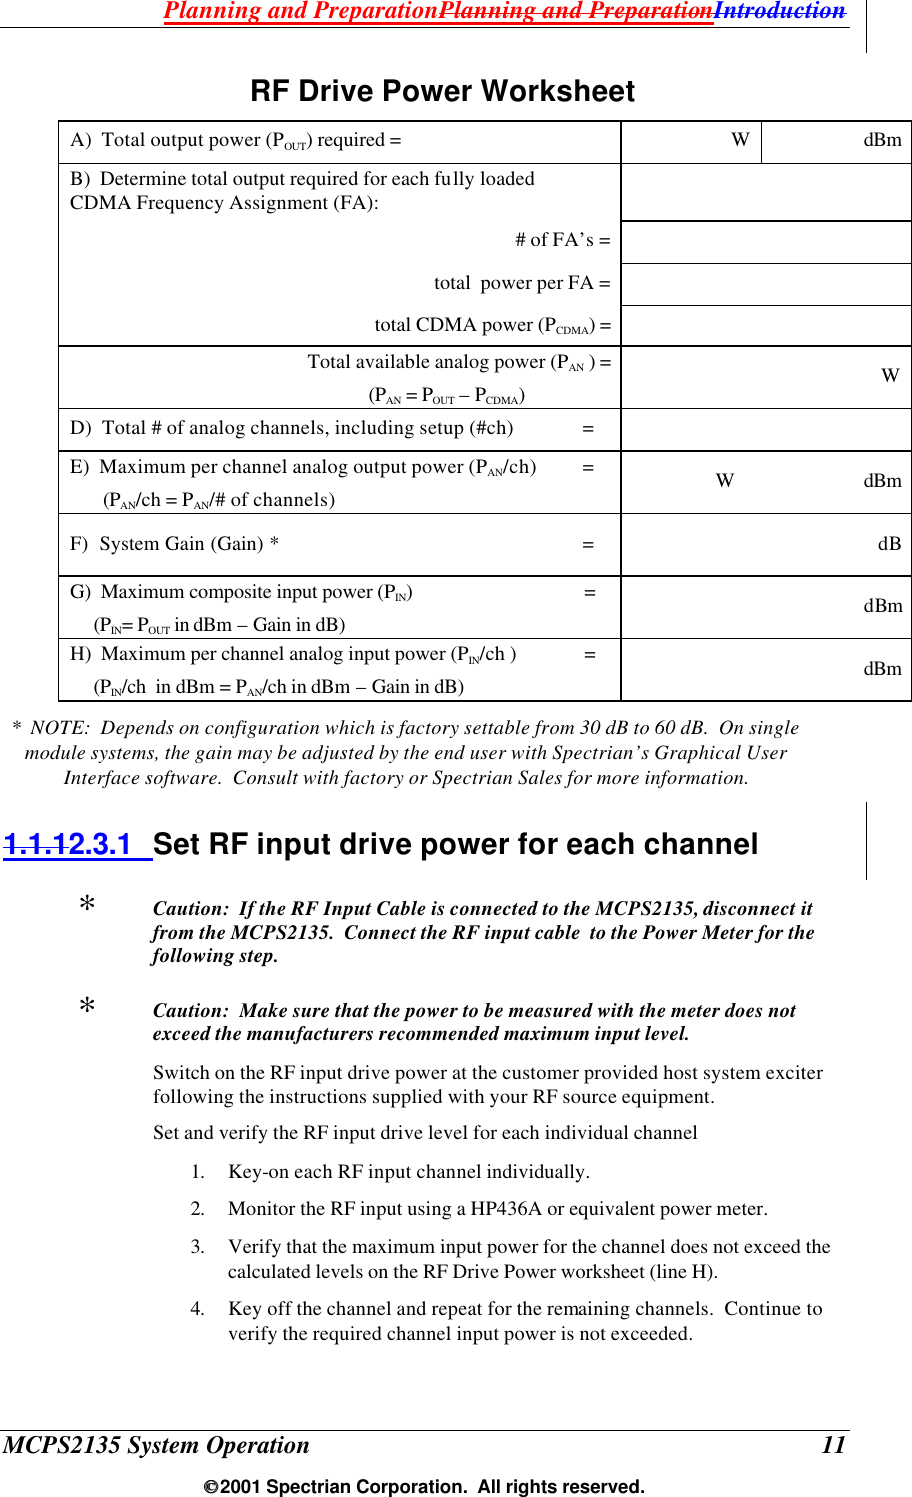 Planning and PreparationPlanning and PreparationIntroduction MCPS2135 System Operation  11  2001 Spectrian Corporation.  All rights reserved. RF Drive Power Worksheet  A)  Total output power (POUT) required = W dBm B)  Determine total output required for each fully loaded CDMA Frequency Assignment (FA):         # of FA’s =   total  power per FA =   total CDMA power (PCDMA) =   Total available analog power (PAN ) =   (PAN = POUT – PCDMA) W D)  Total # of analog channels, including setup (#ch)  =   E)  Maximum per channel analog output power (PAN/ch) =         (PAN/ch = PAN/# of channels) W dBm F)  System Gain (Gain) * =                              dB G)  Maximum composite input power (PIN) =      (PIN= POUT in dBm – Gain in dB)                               dBm H)  Maximum per channel analog input power (PIN/ch ) =       (PIN/ch  in dBm = PAN/ch in dBm – Gain in dB)                              dBm *  NOTE:  Depends on configuration which is factory settable from 30 dB to 60 dB.  On single module systems, the gain may be adjusted by the end user with Spectrian’s Graphical User Interface software.  Consult with factory or Spectrian Sales for more information. 1.1.12.3.1 Set RF input drive power for each channel ∗  Caution:  If the RF Input Cable is connected to the MCPS2135, disconnect it from the MCPS2135.  Connect the RF input cable  to the Power Meter for the following step.   ∗  Caution:  Make sure that the power to be measured with the meter does not exceed the manufacturers recommended maximum input level. Switch on the RF input drive power at the customer provided host system exciter following the instructions supplied with your RF source equipment. Set and verify the RF input drive level for each individual channel 1. Key-on each RF input channel individually. 2. Monitor the RF input using a HP436A or equivalent power meter.  3. Verify that the maximum input power for the channel does not exceed the calculated levels on the RF Drive Power worksheet (line H).  4. Key off the channel and repeat for the remaining channels.  Continue to verify the required channel input power is not exceeded.  